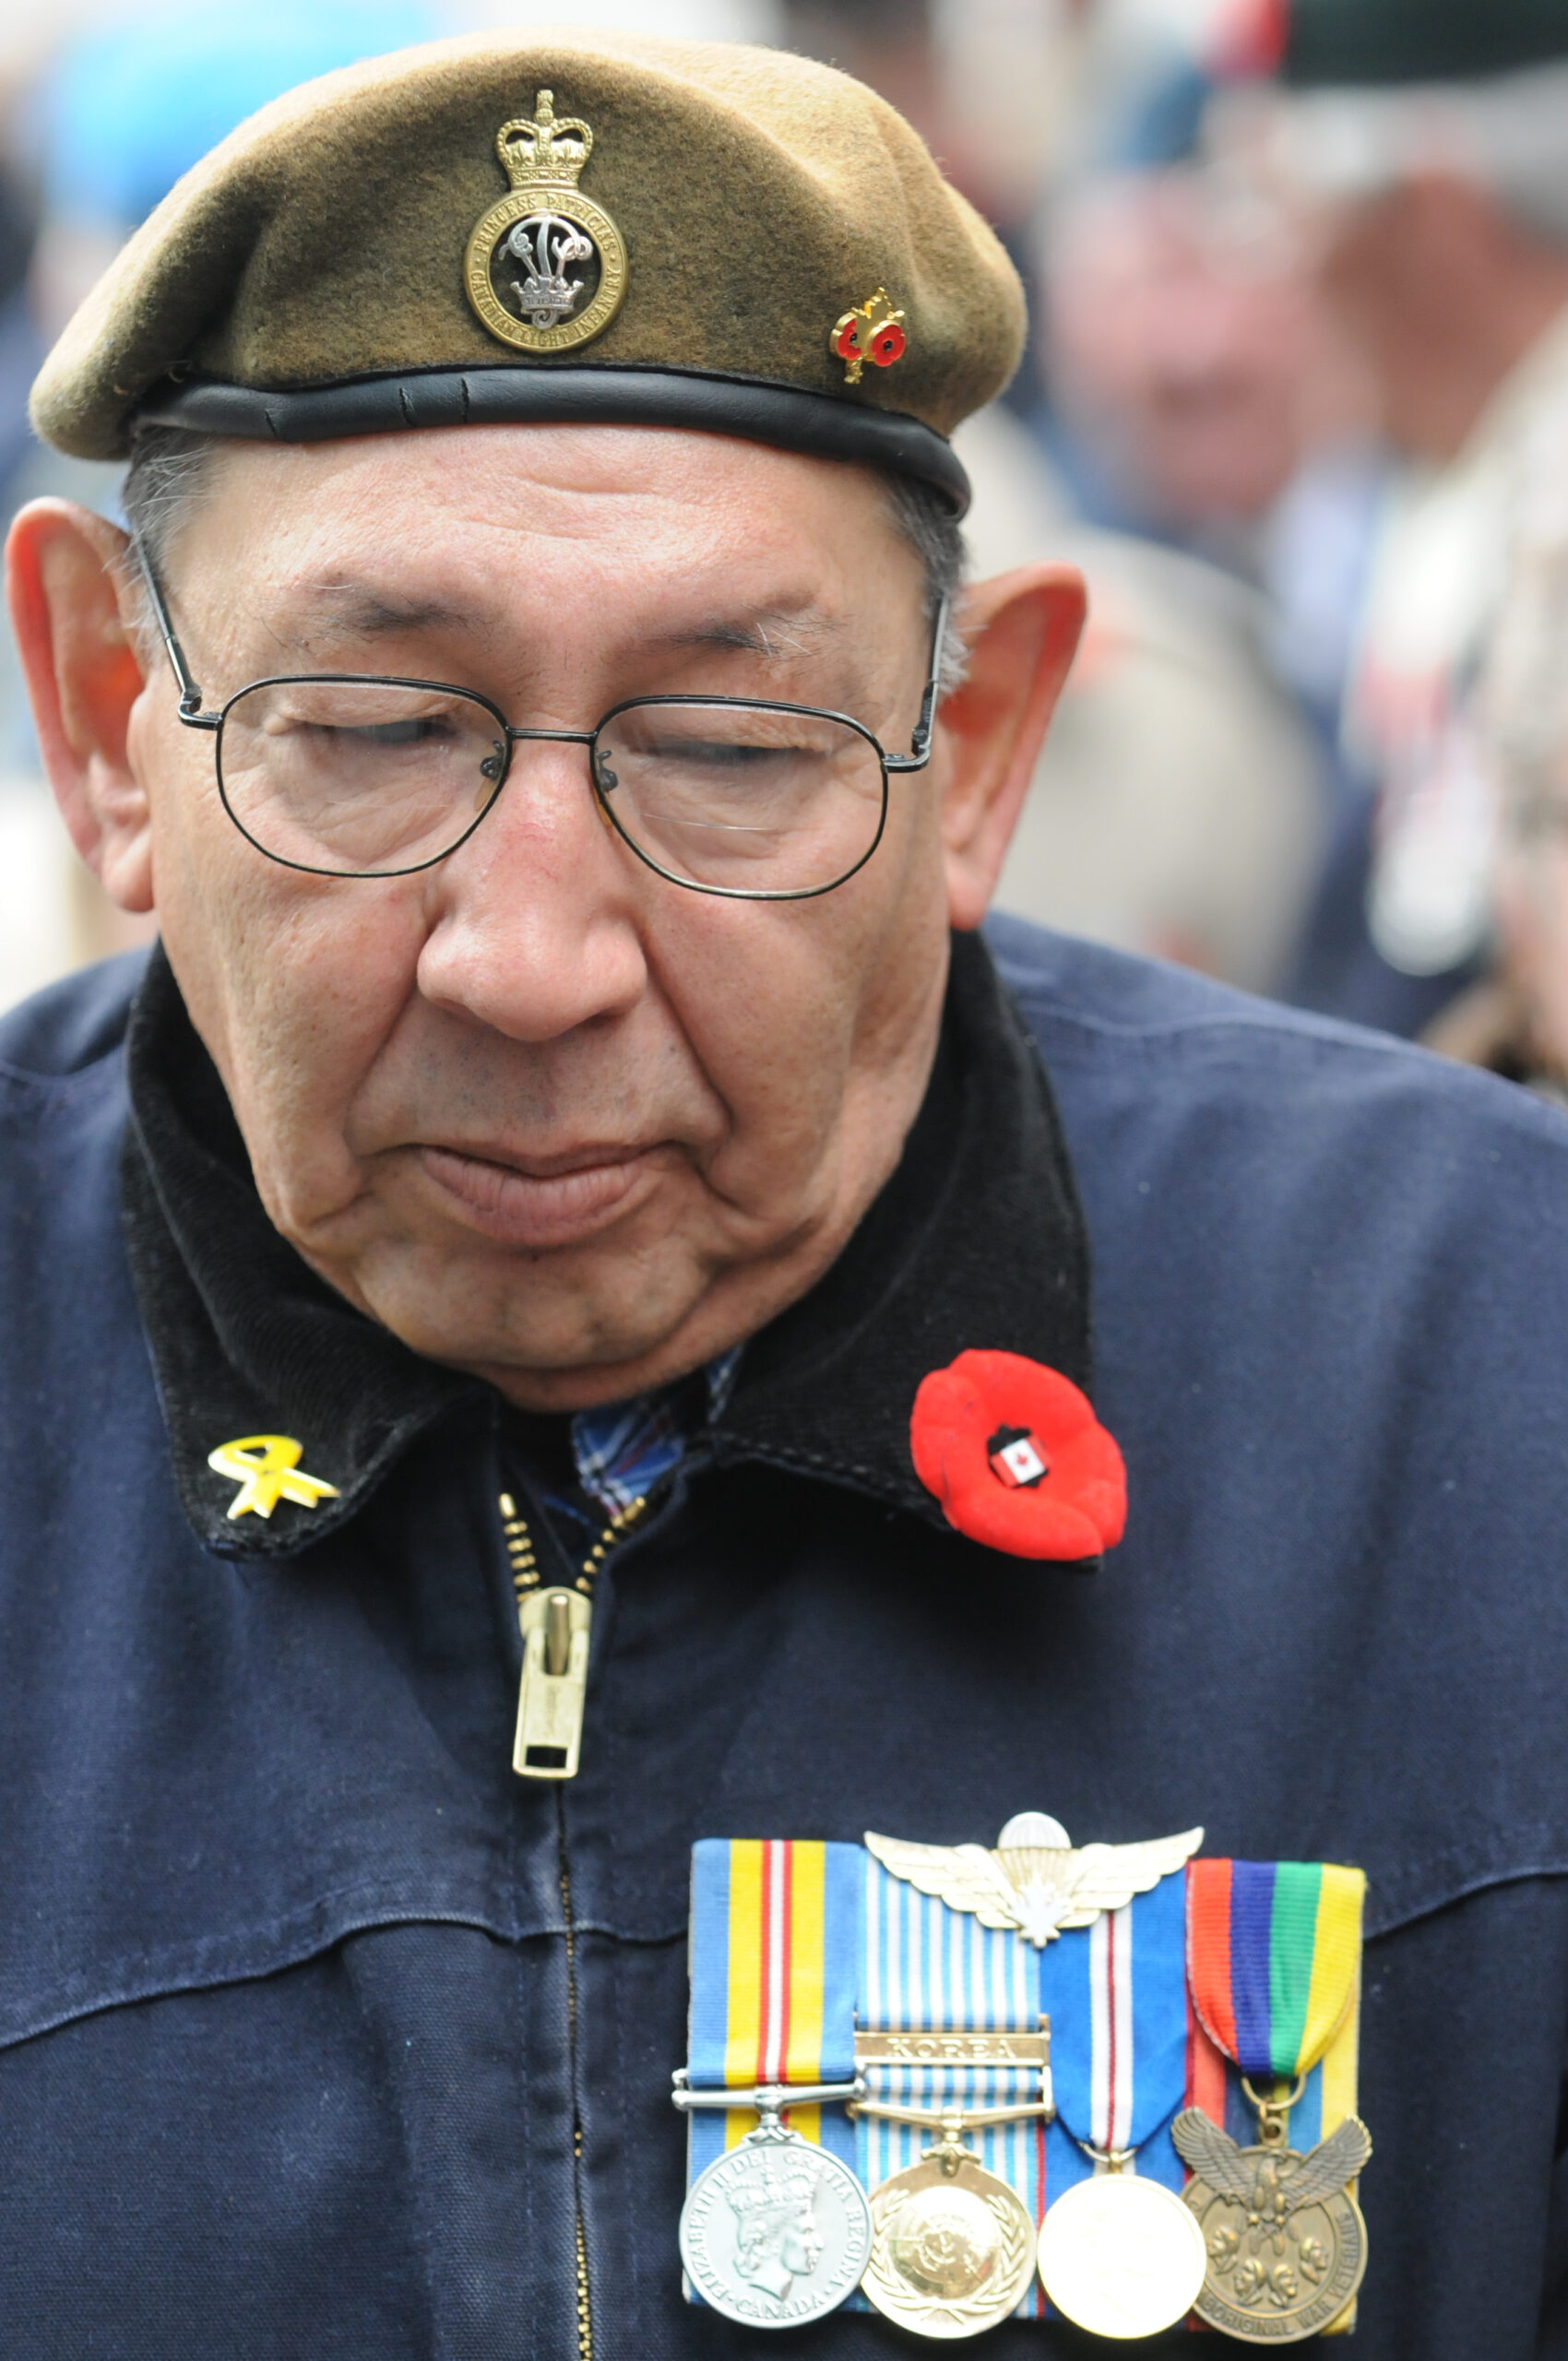 Thousands of First Nations fought in World War 1 & 2, however, when they returned home they were enfranchised and lost their Indian Status often because they were away from the reserve for too long. When they went to Veteran Affairs they were told that they did not qualify for services because they were Indian.